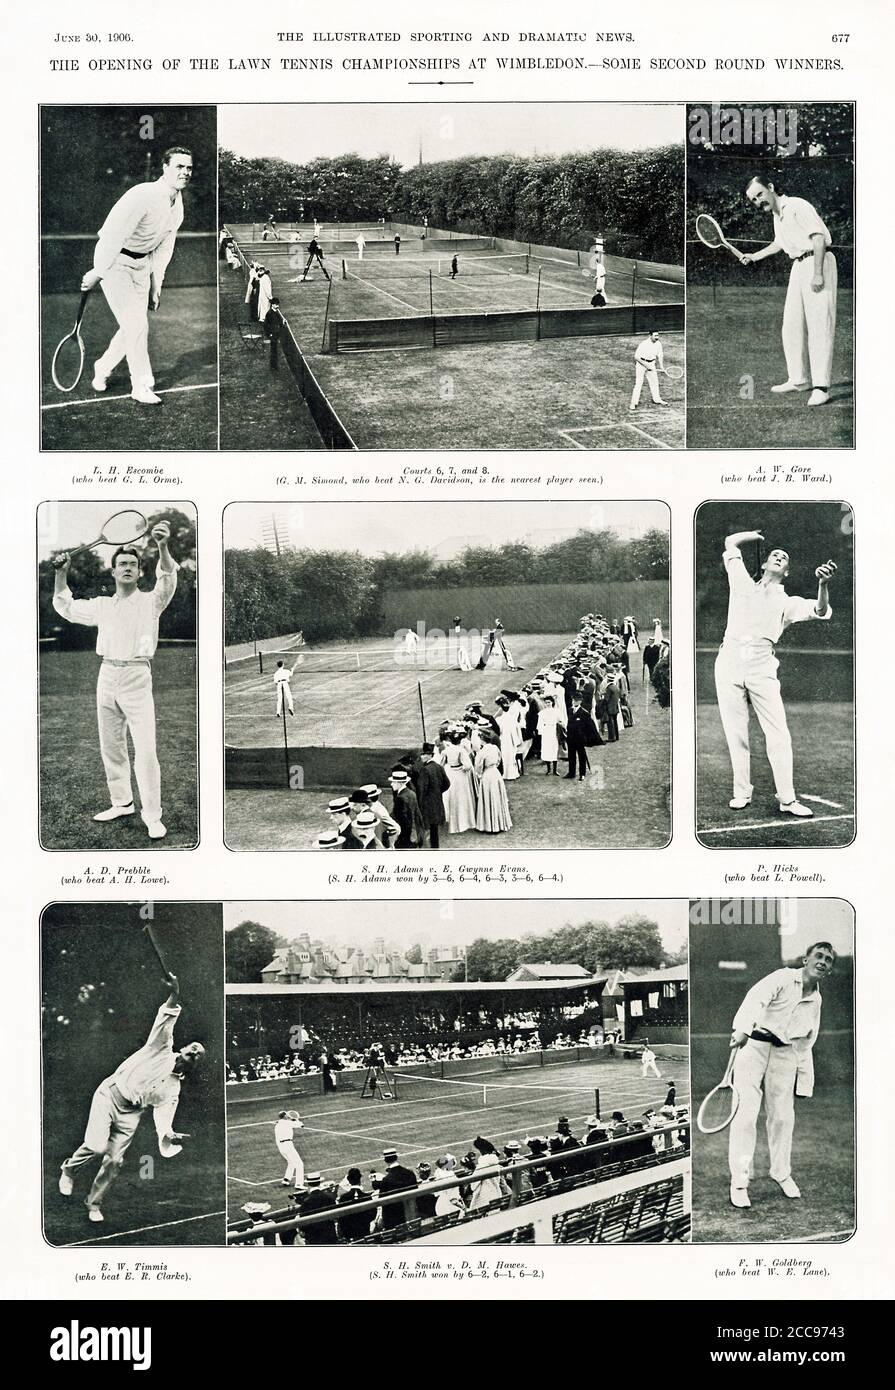 Wimbledon, 1906 magazine coverage of the opening of the Lawn Tennis Championships in June with some second round winners Stock Photo